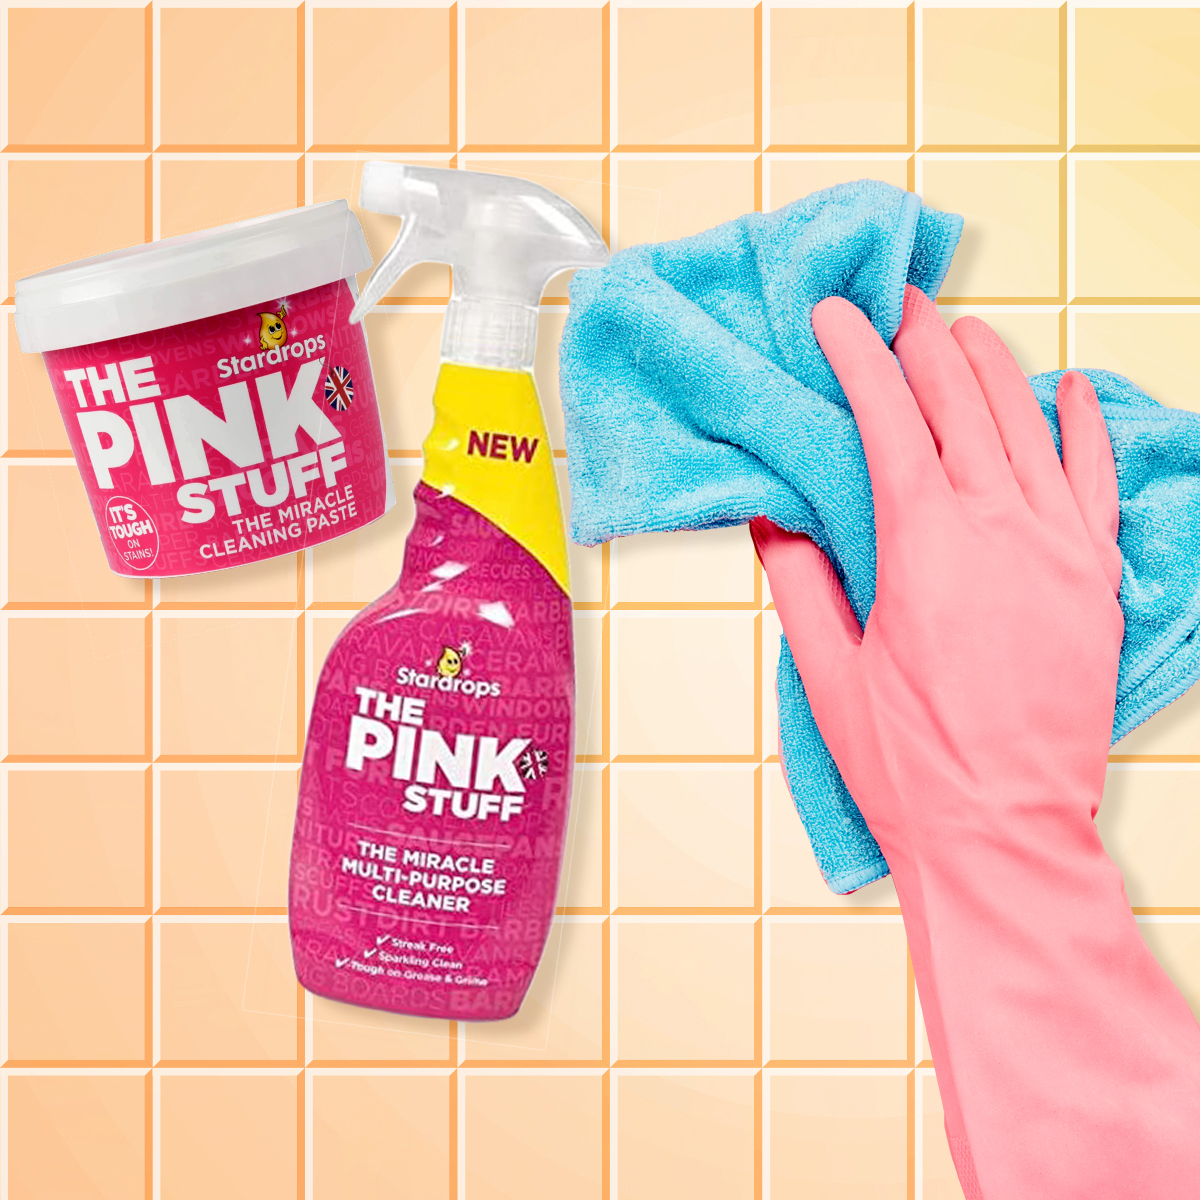 The Pink Stuff cleaner review: the TikTok product lives up to the hype